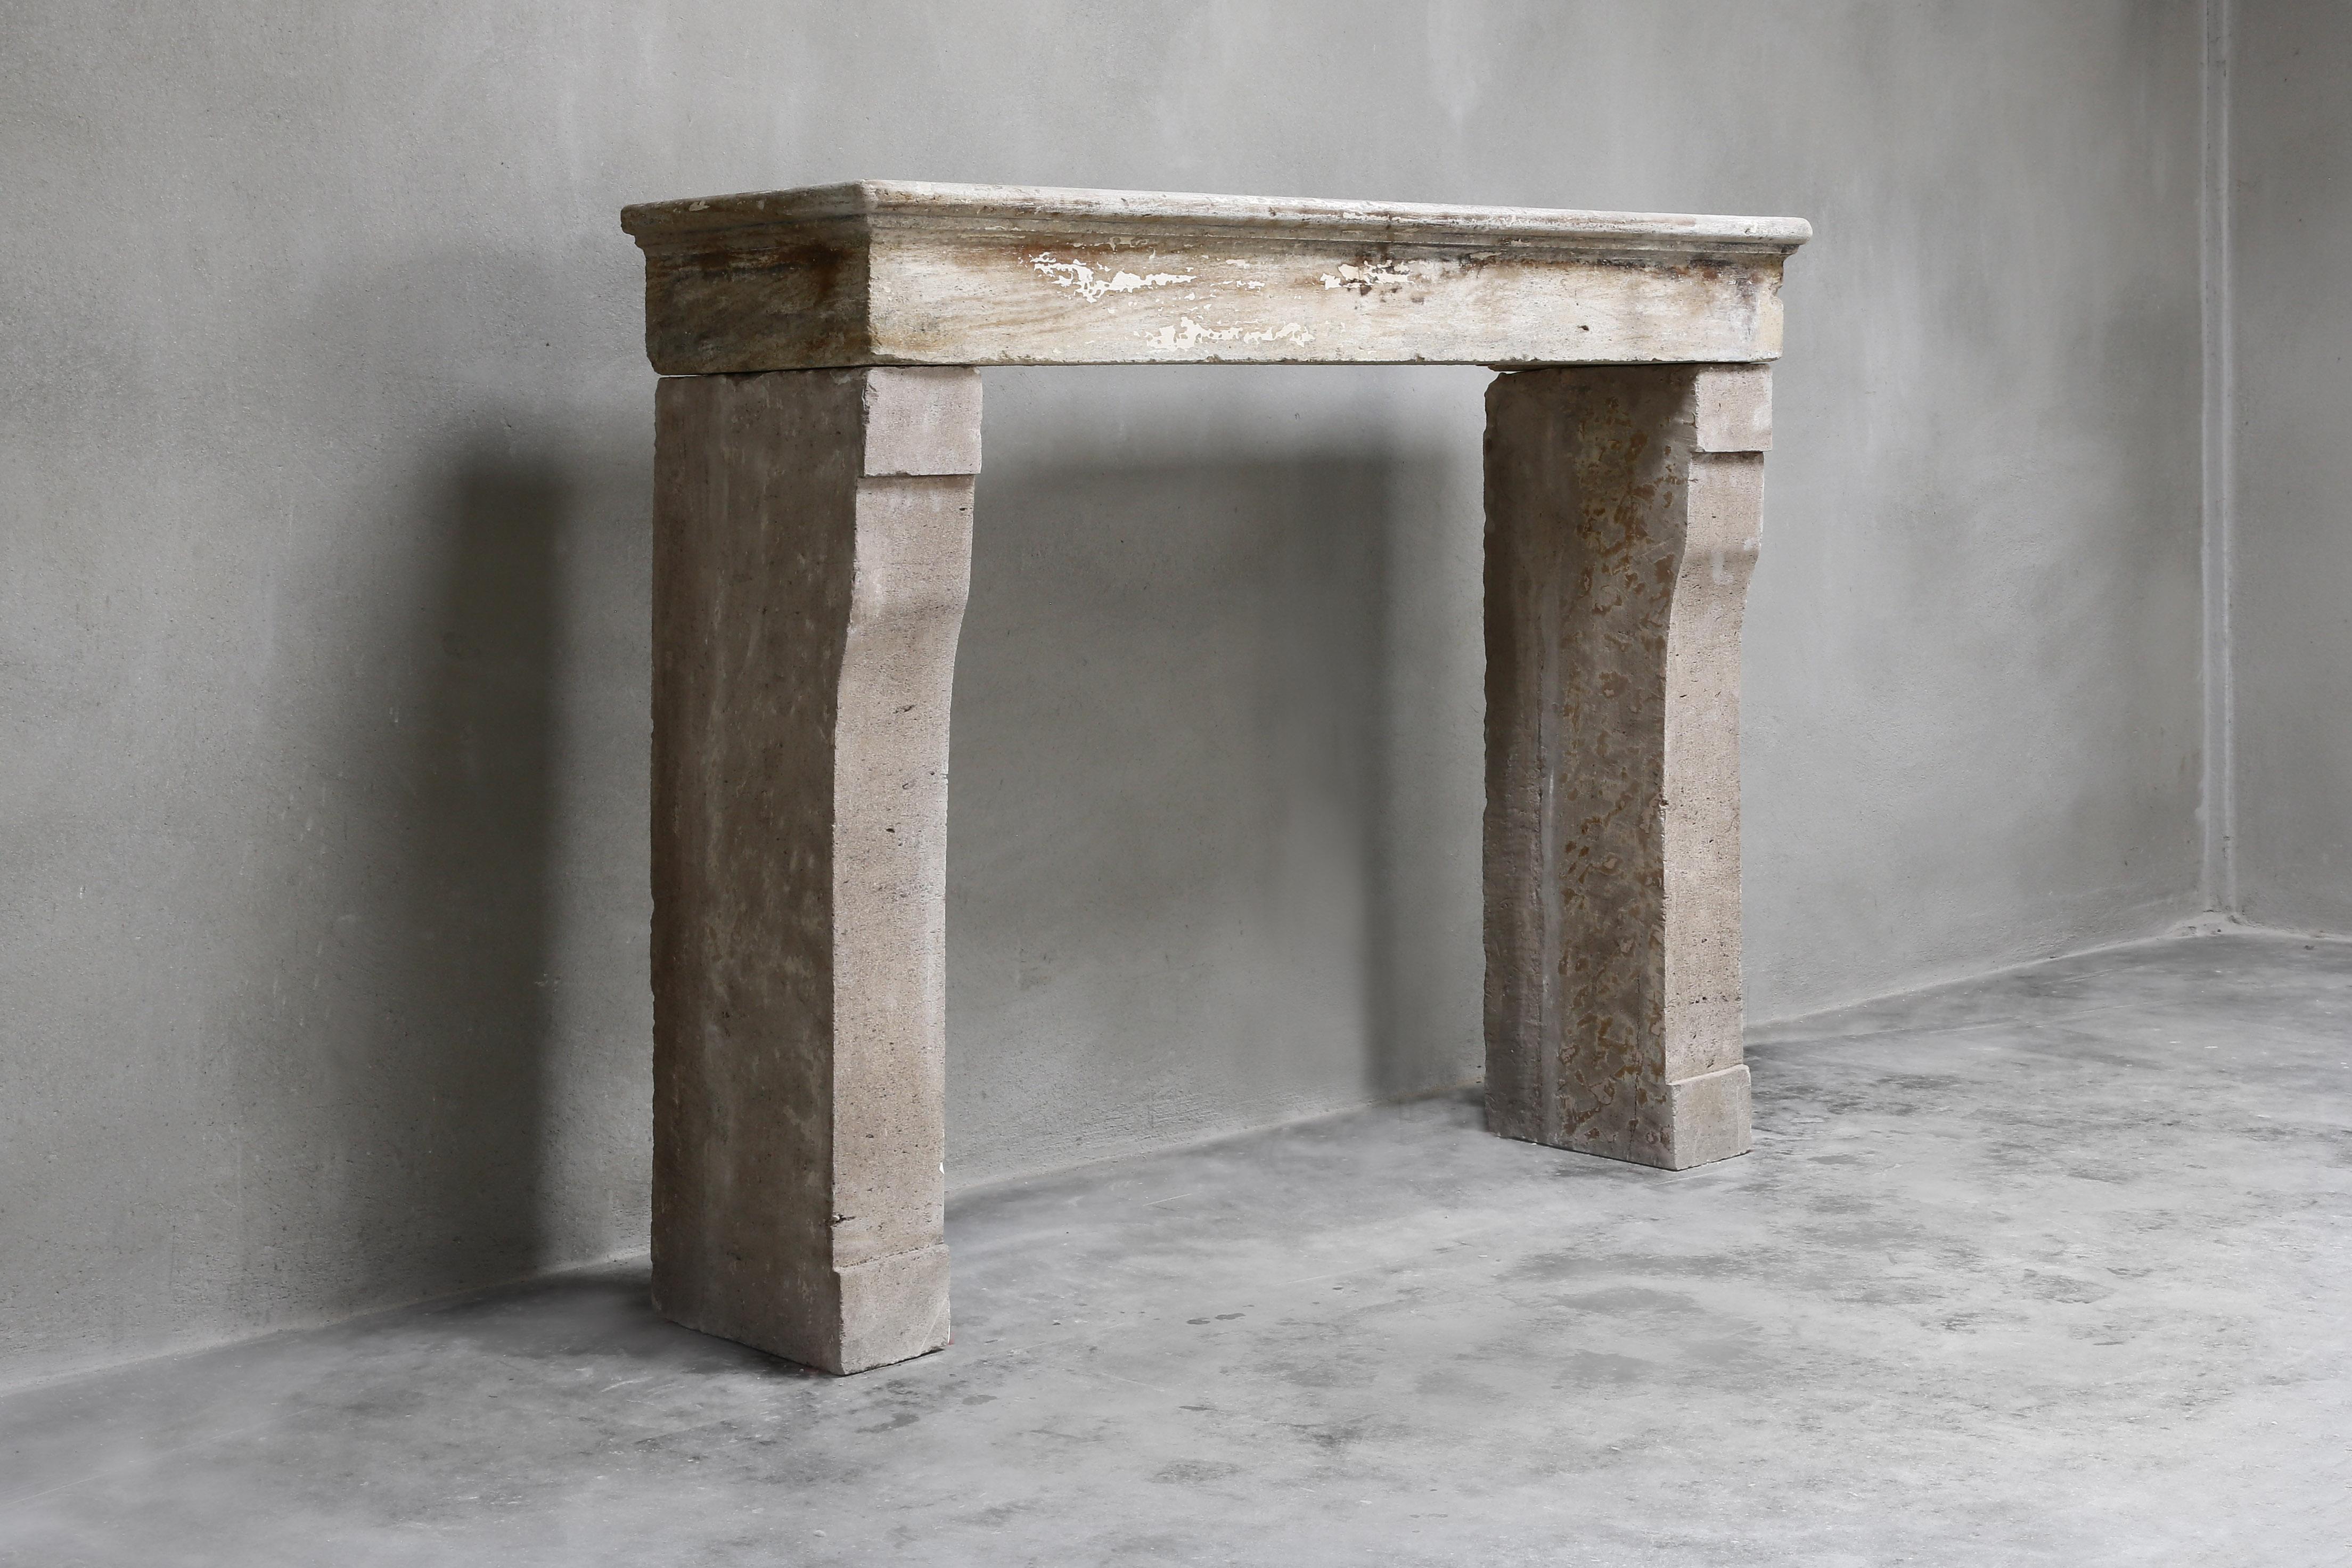 Beautiful sober antique fireplace from the 19th century. A fireplace of French limestone with a straight top and slightly bent legs. The color nuance is warm and there is a beautiful patinae on the fireplace. This fireplace is ideal for rural or